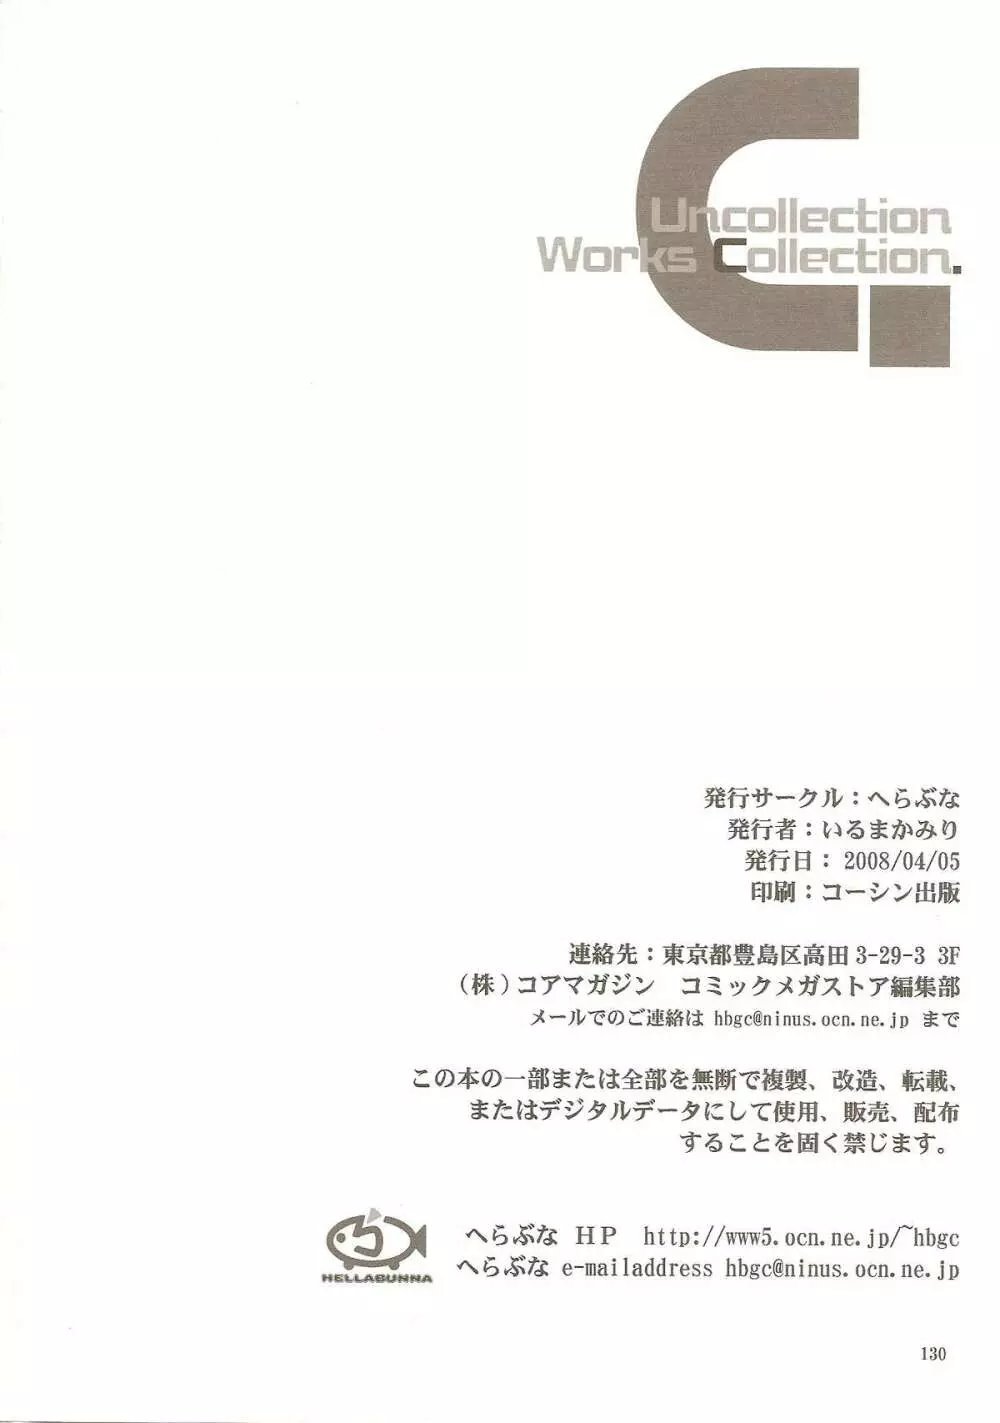 Ucollection Works Collection 129ページ